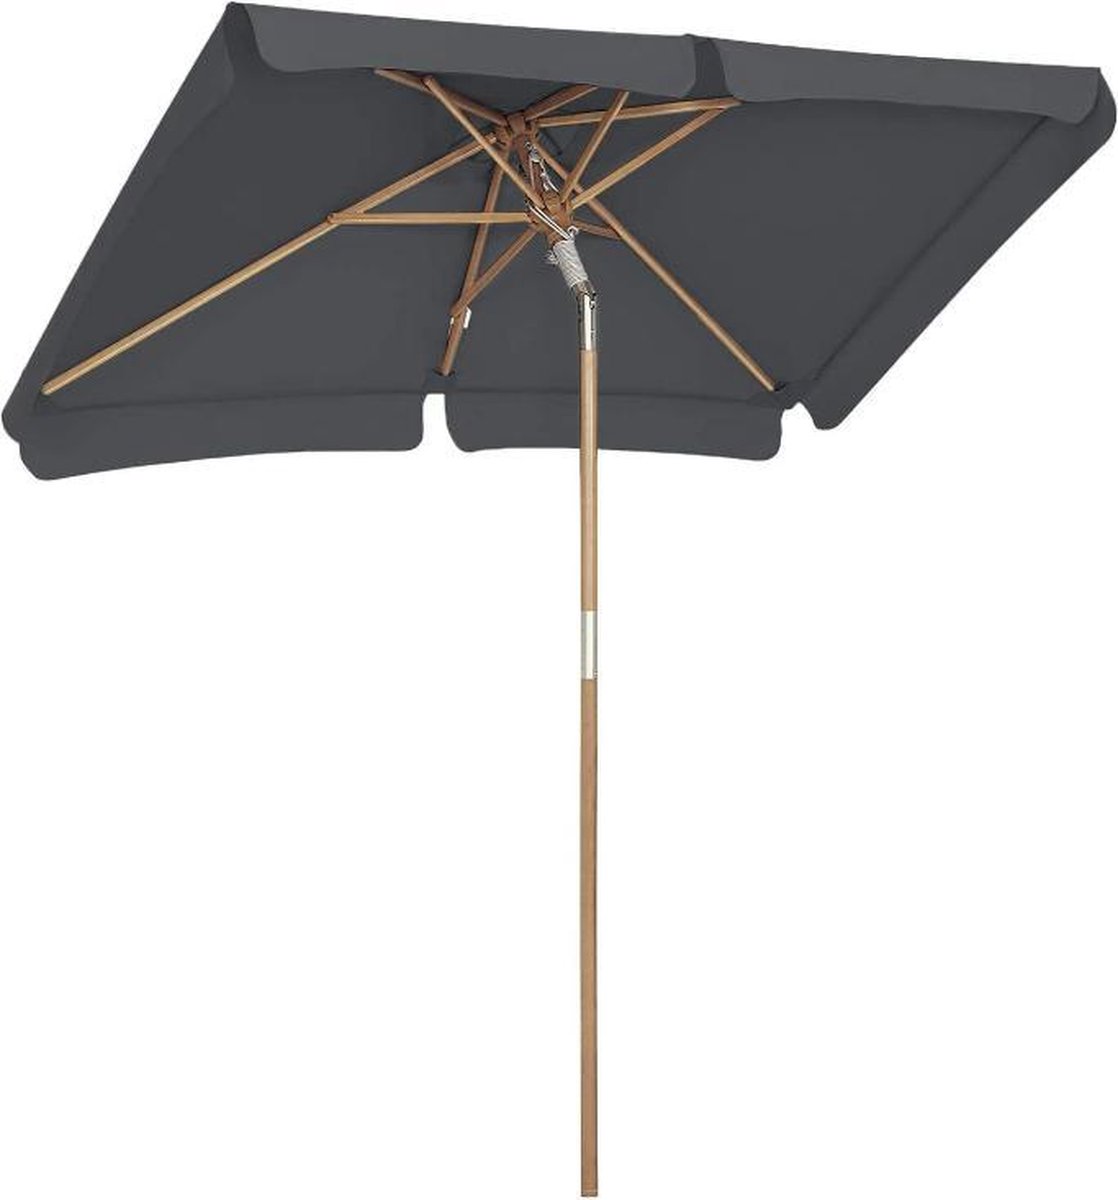 MIRA Home - Parasol - Tuinparasol - Tuin - Polyester - Staal - Donker grijs - 300x236